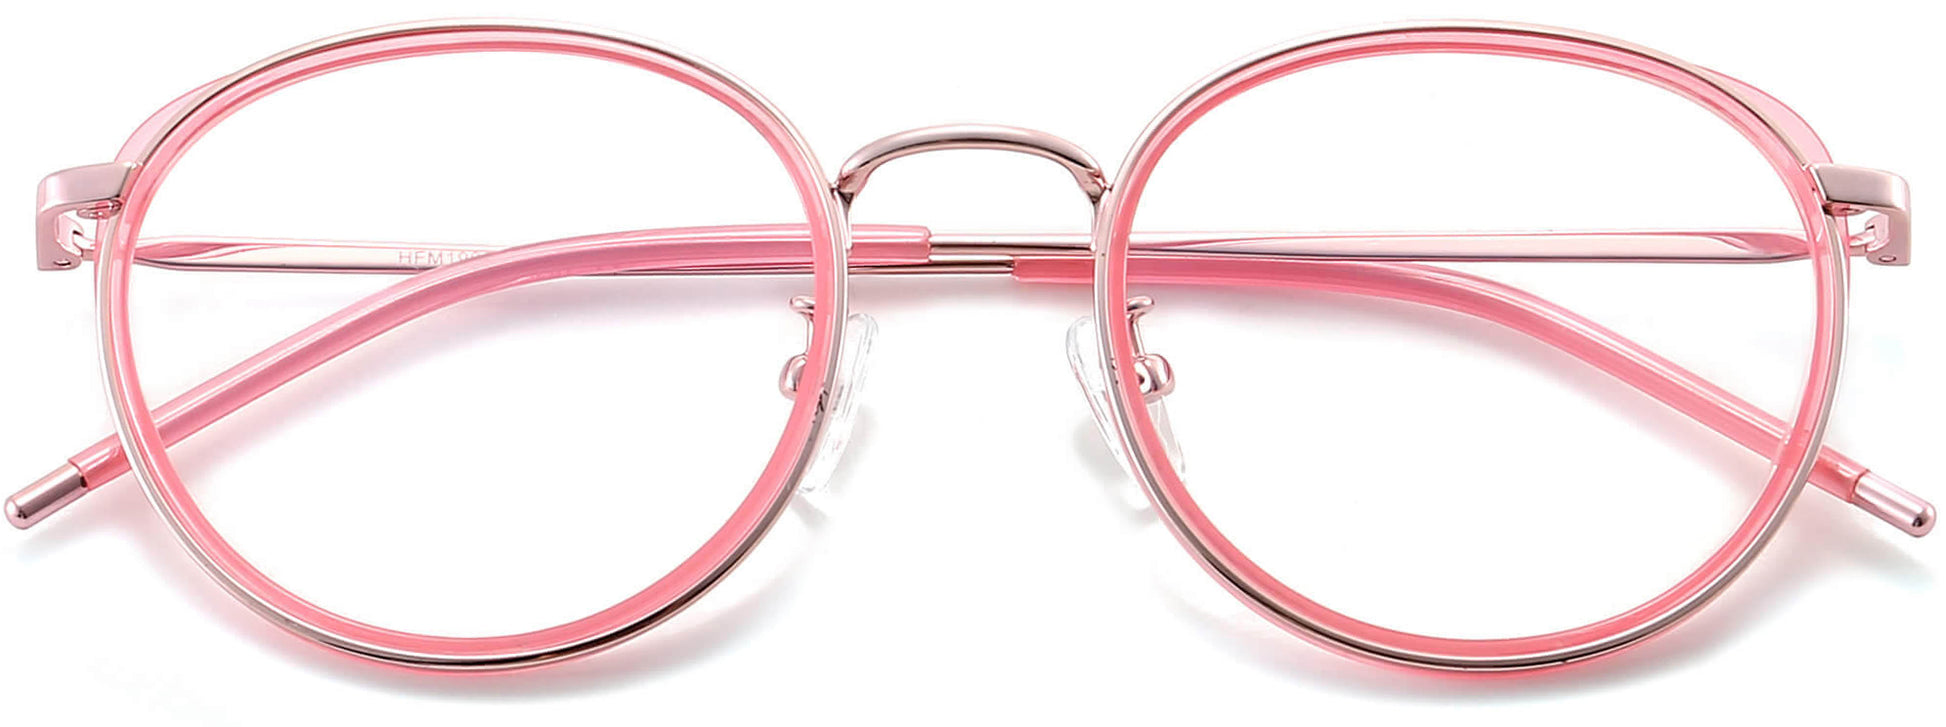 Maggie Round Pink Eyeglasses from ANRRI, closed view